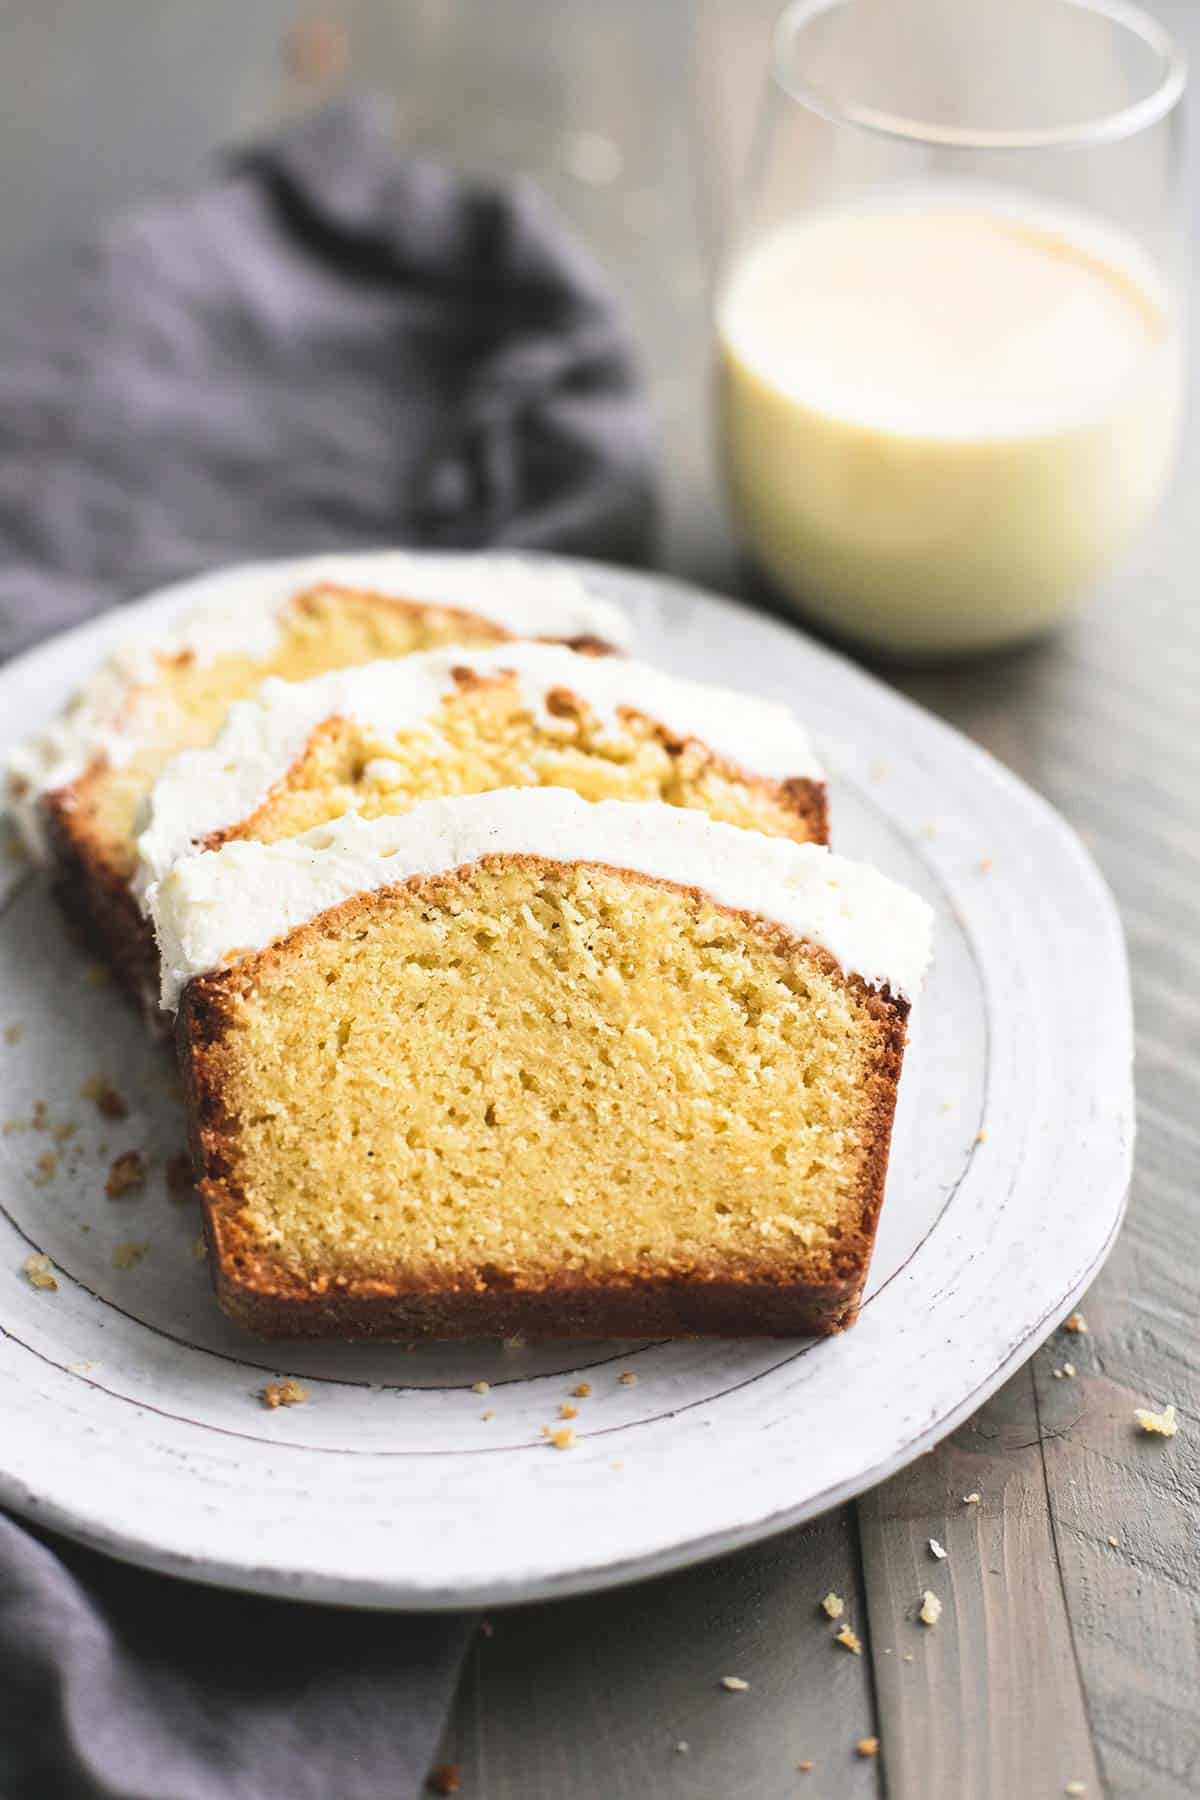 eggnog pound cake slices on a cake with a glass of eggnog on the side.